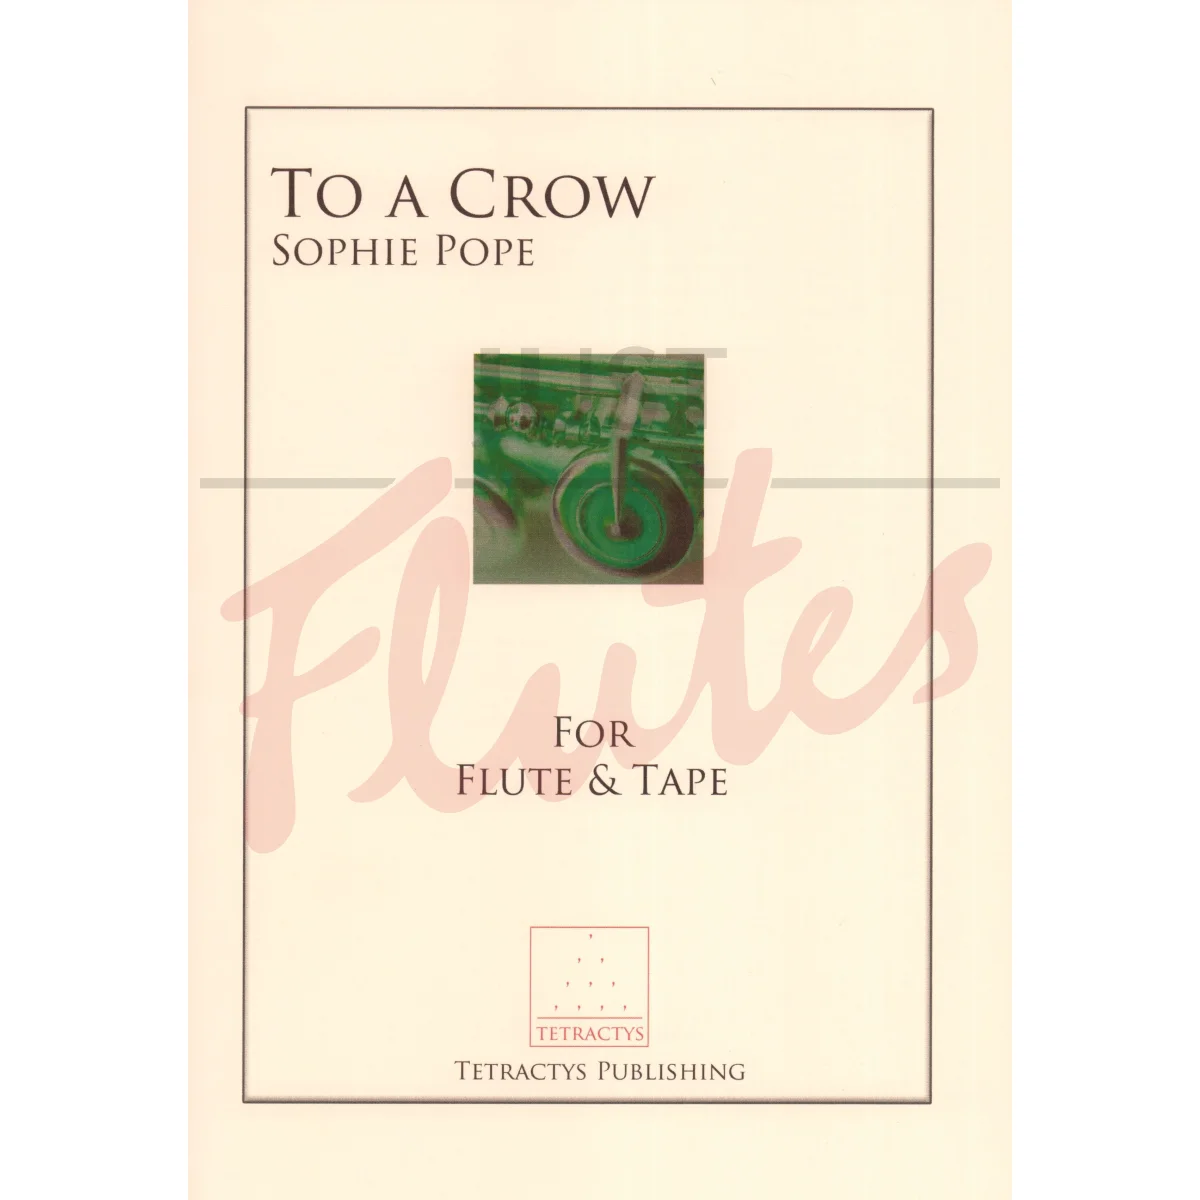 To a Crow for Flute and Tape